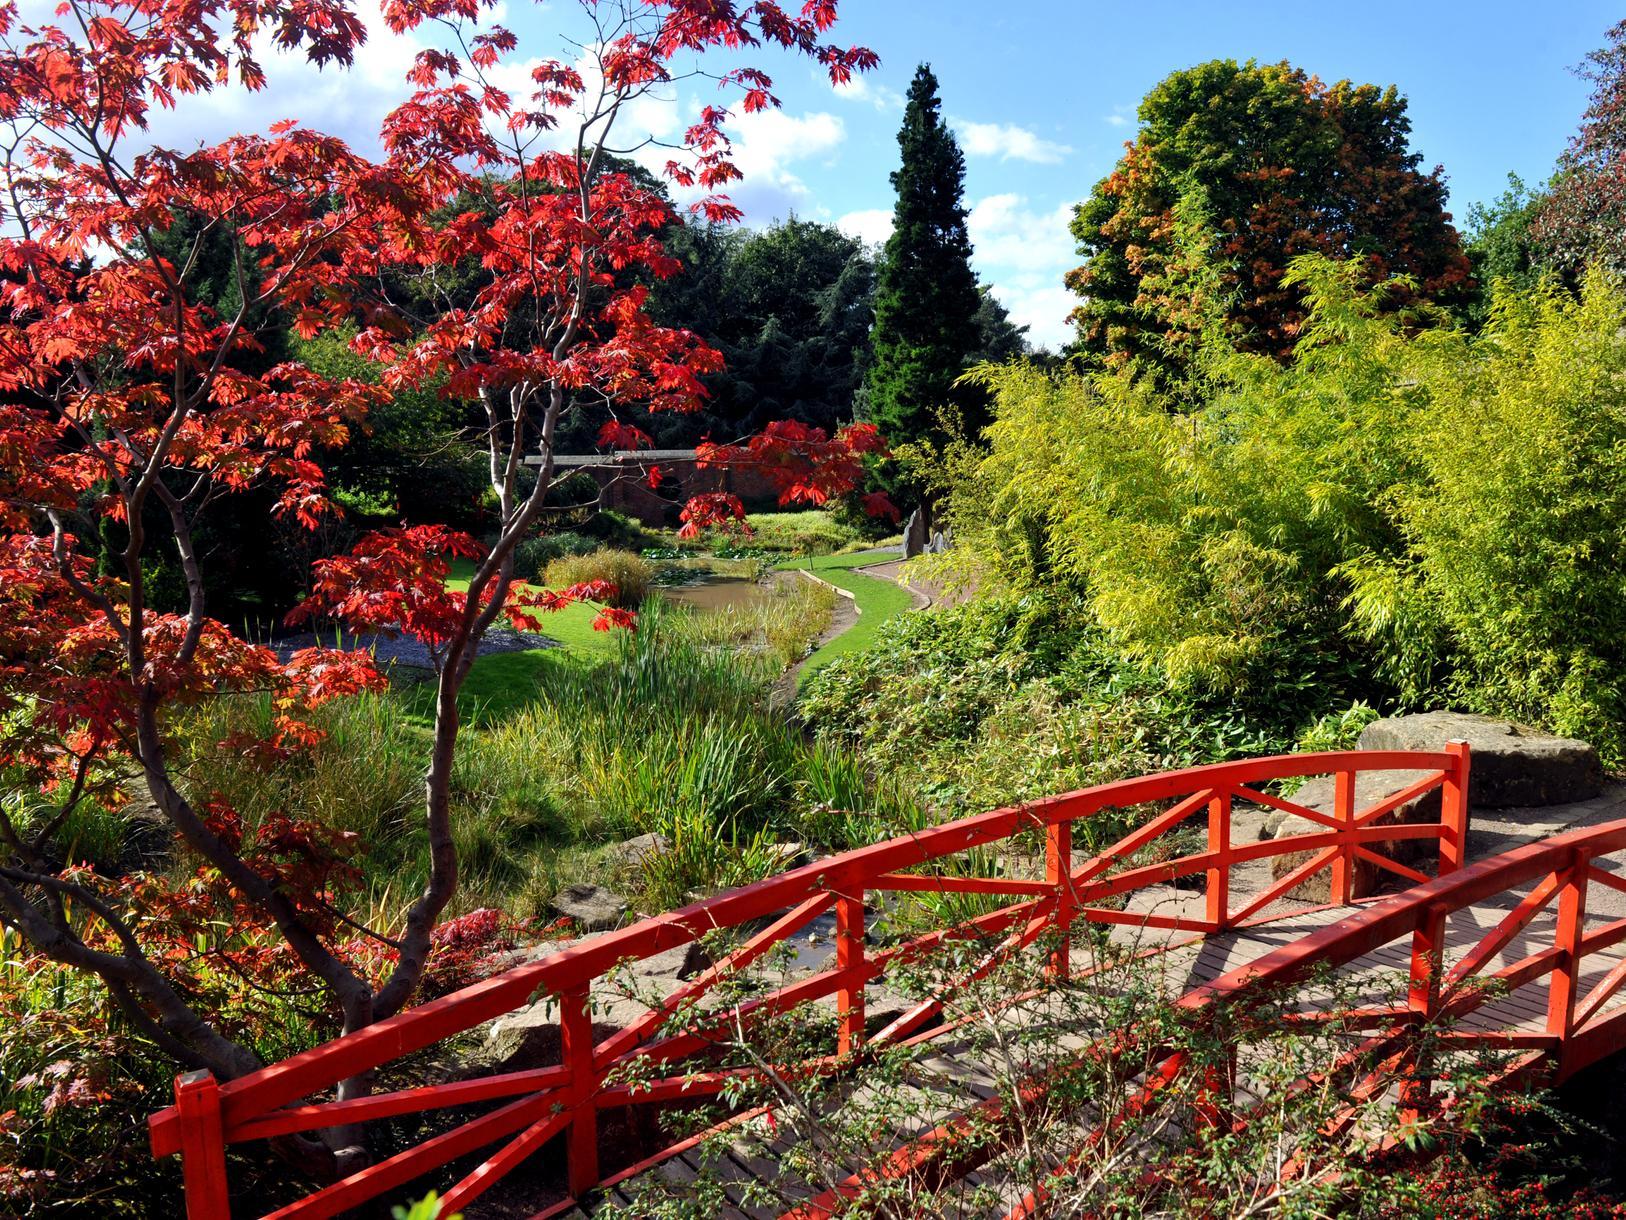 Originally opened in 1987, the Japanese Garden is a celebration of traditional oriental gardens, with various features and materials used to represent Japan's  mountains, woodland areas, waterfalls, lakes and grasslands.